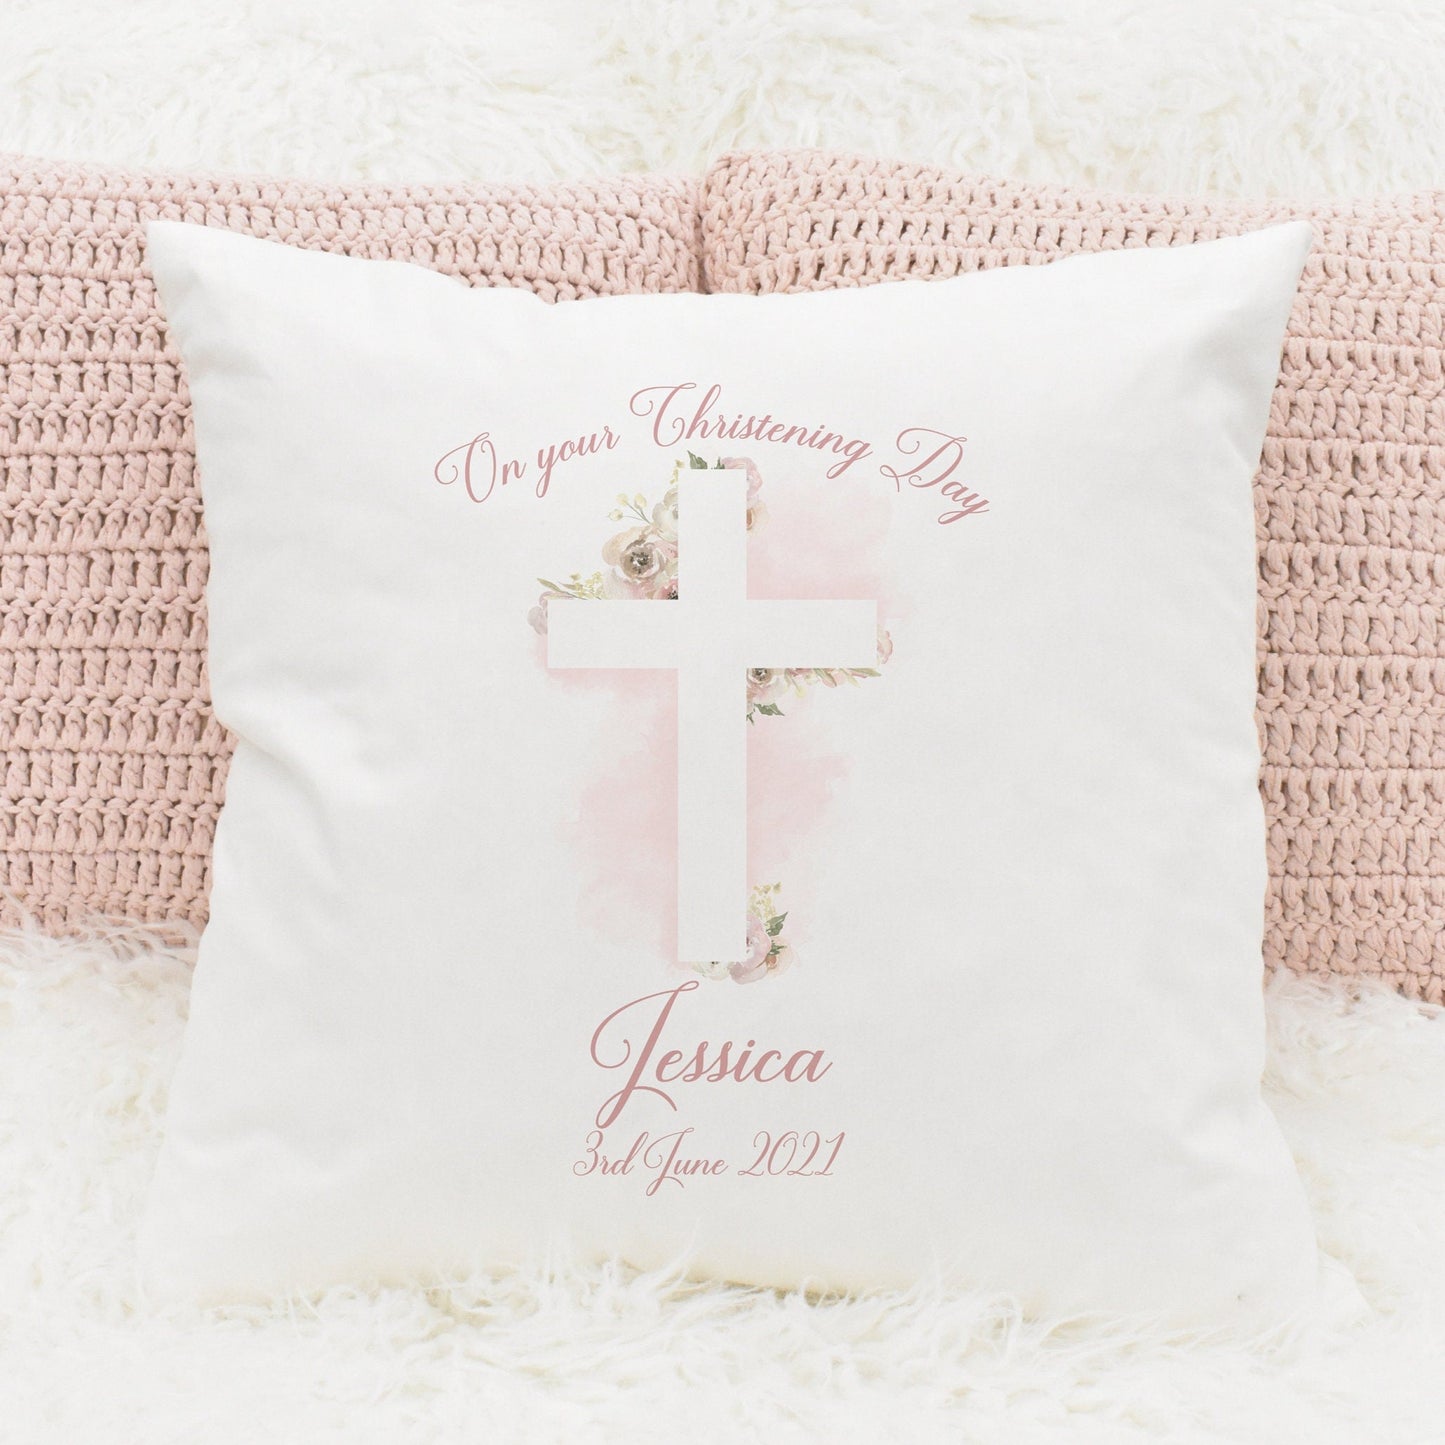 Christening cushion gift featuring a floral cross in pink and personalised text